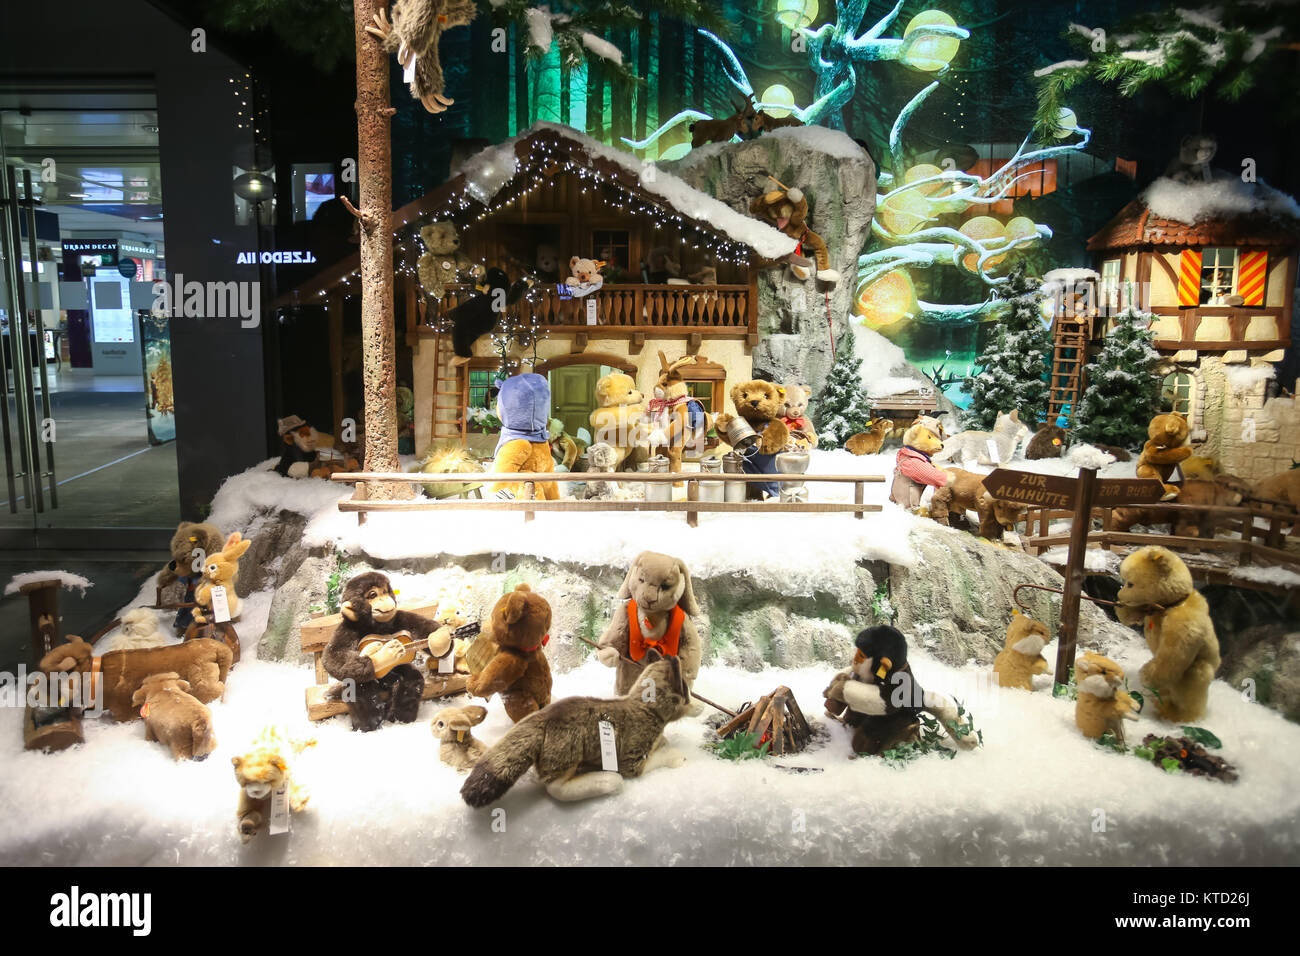 MUNICH, GERMANY - DECEMBER 11, 2017 : The shop window of Galeria Kaufhof ornated with toys in winter style at night in Munich, Germany. Stock Photo